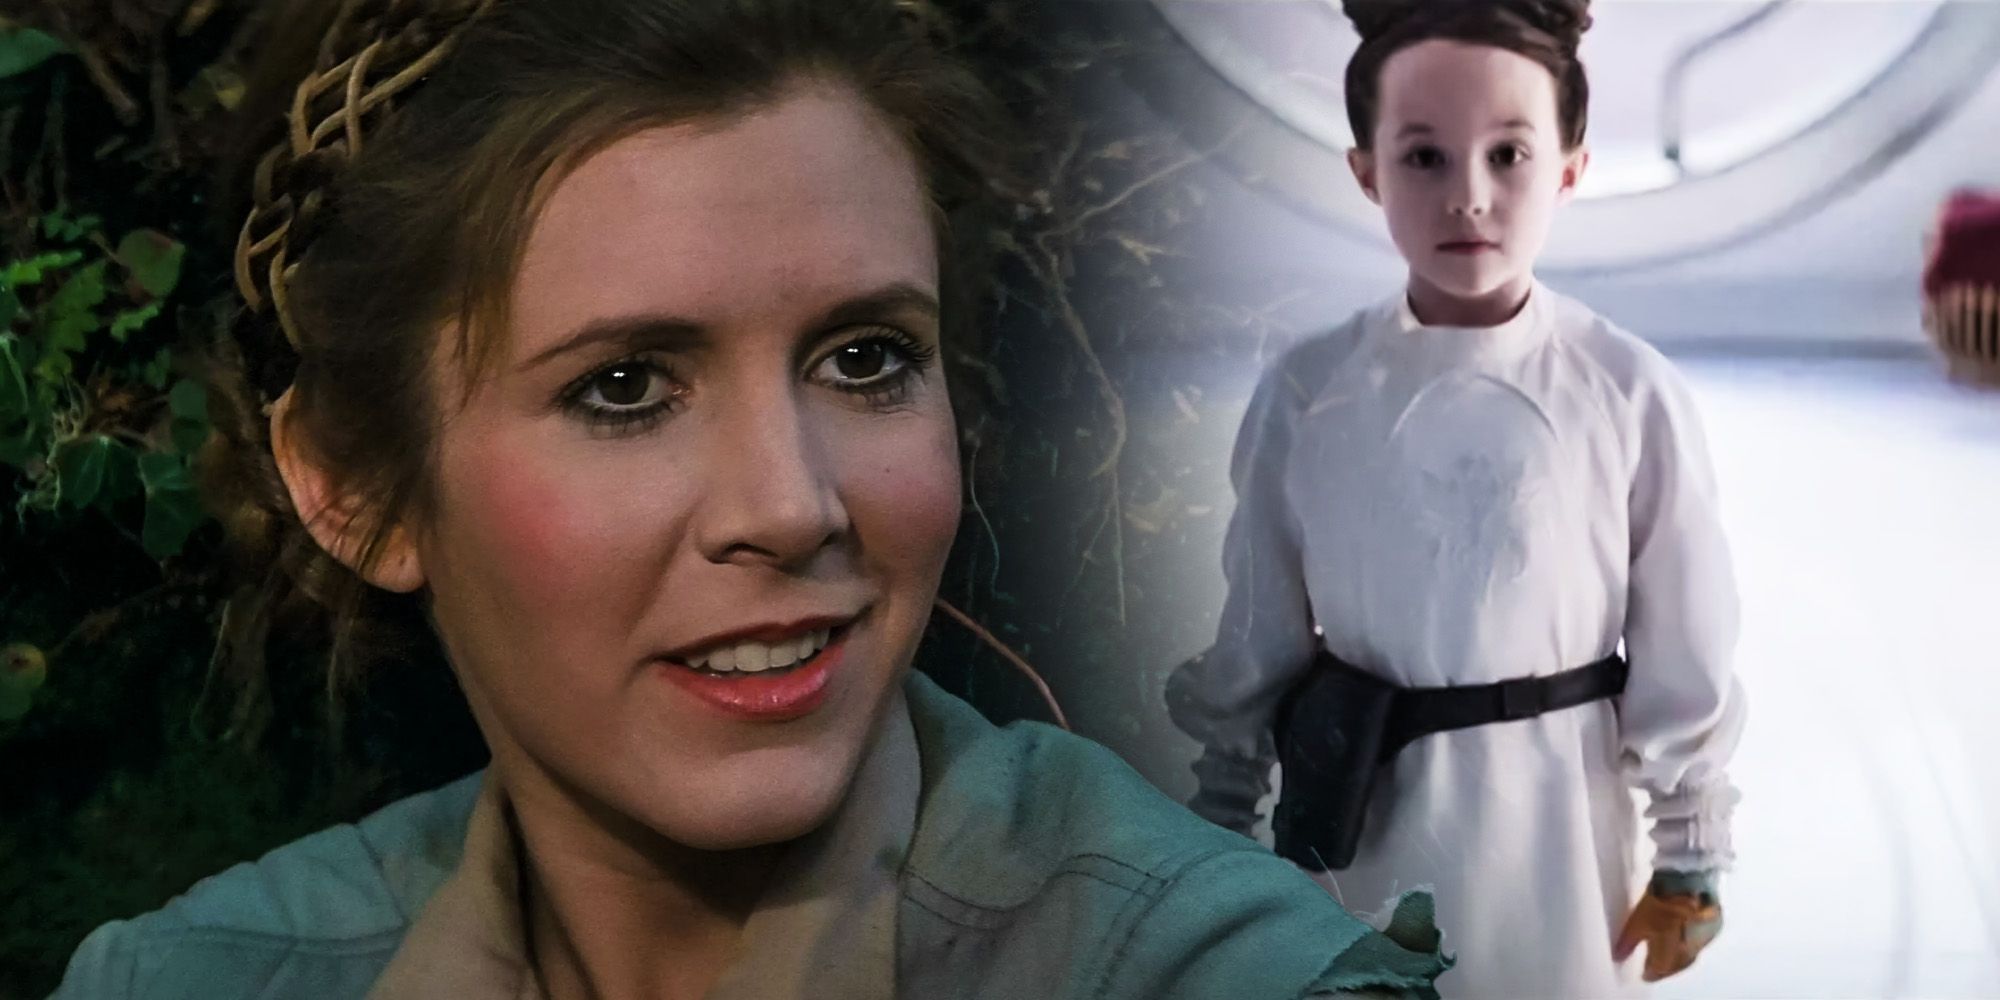 A collage photo of an older Leia from Return of the Jedi and a young Leia from Obi-Wan